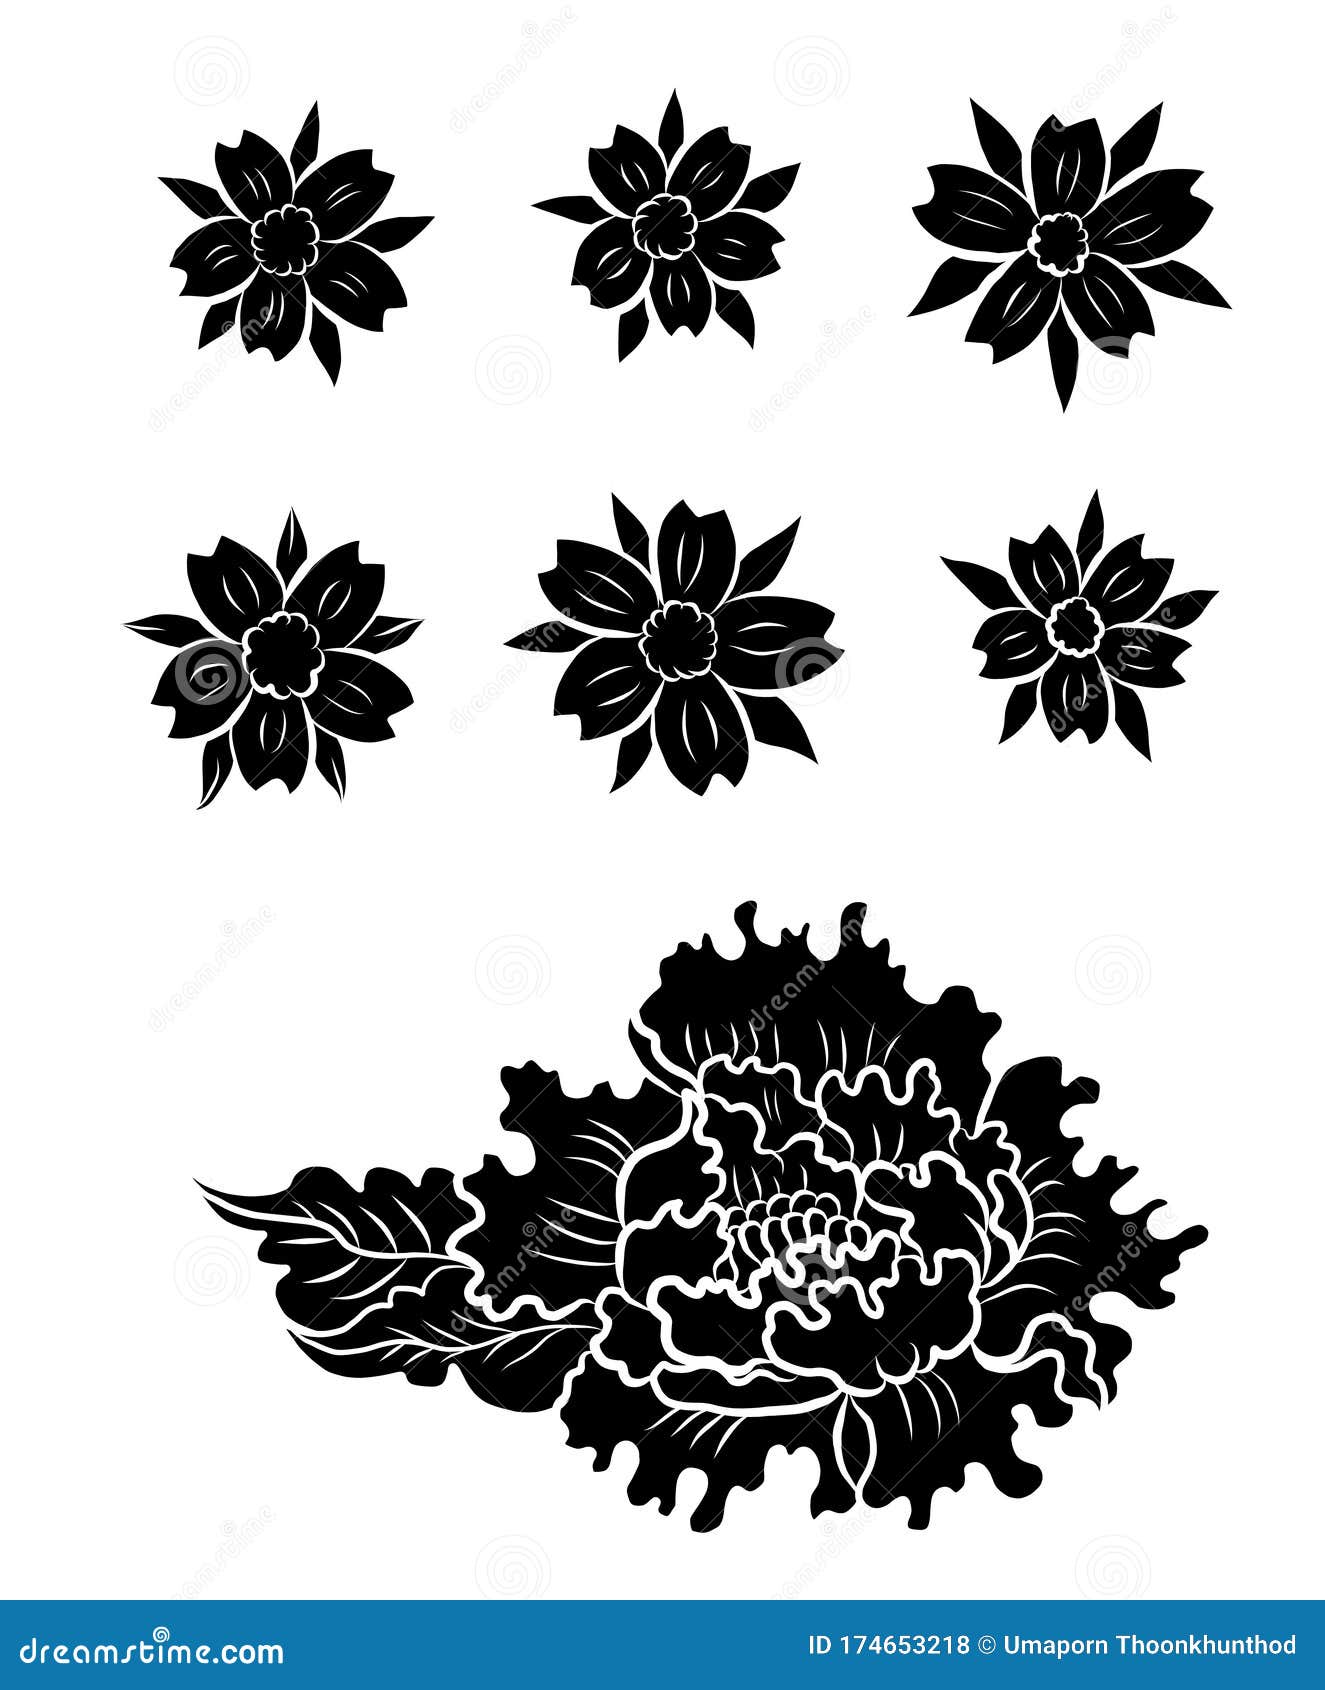 Chrysanthemum Flower Vector For Tattoo Design On White Background.Beautiful  Line Art With Peony Flower Illustration On Isolated. Stock Vector -  Illustration Of Decorative, Bouquet: 174653218